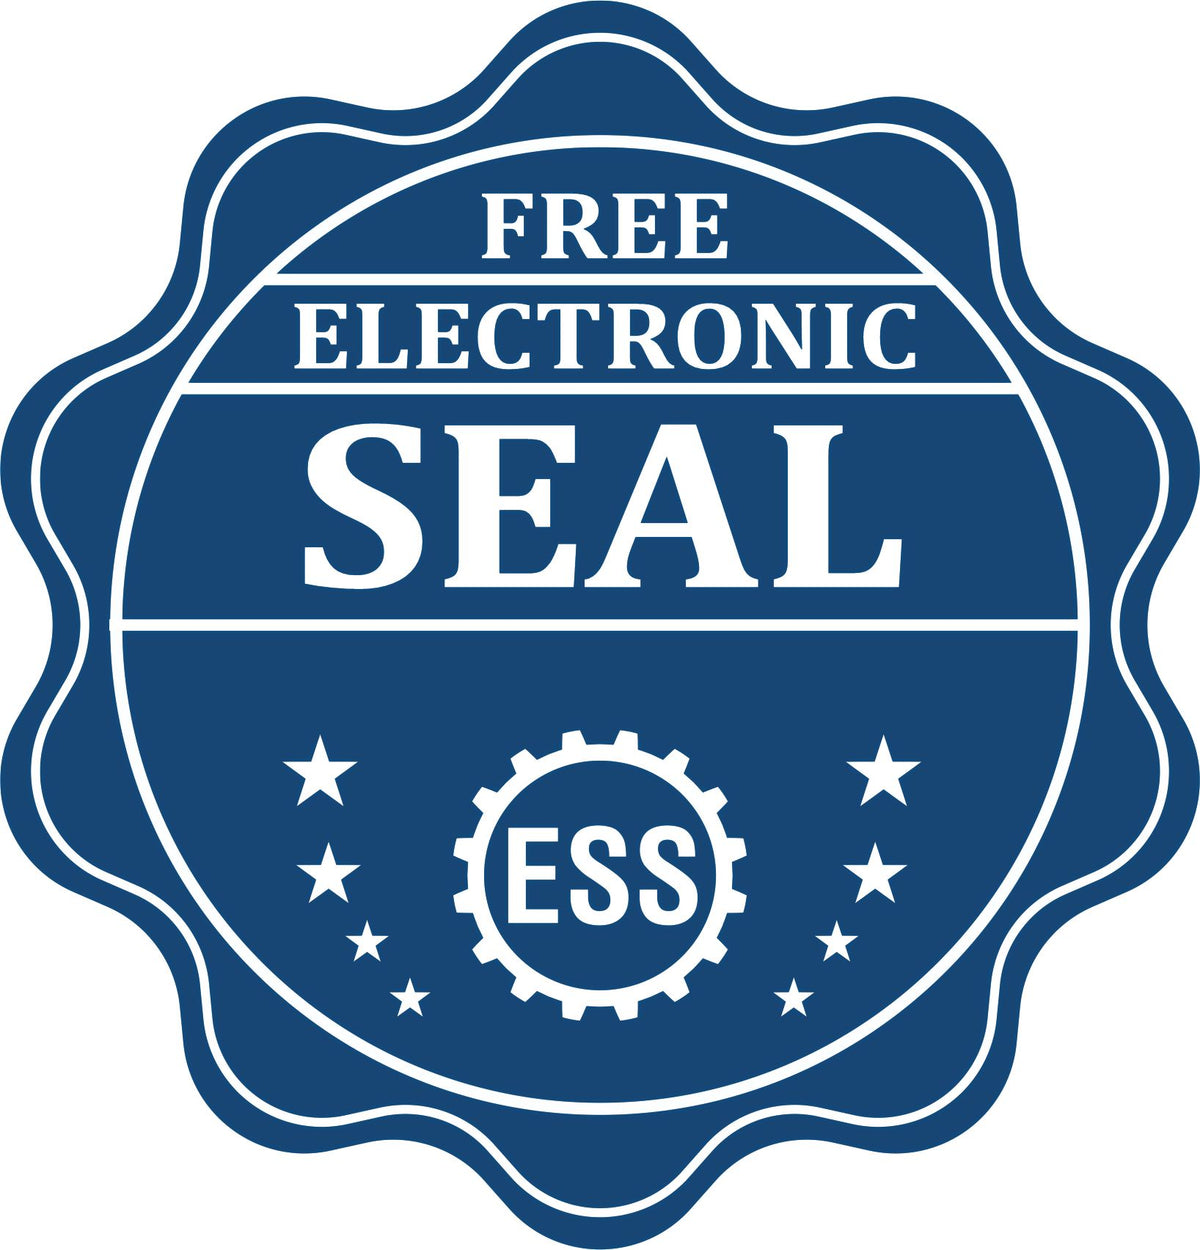 A badge showing a free electronic seal for the Handheld Virginia Professional Engineer Embosser with stars and the ESS gear on the emblem.